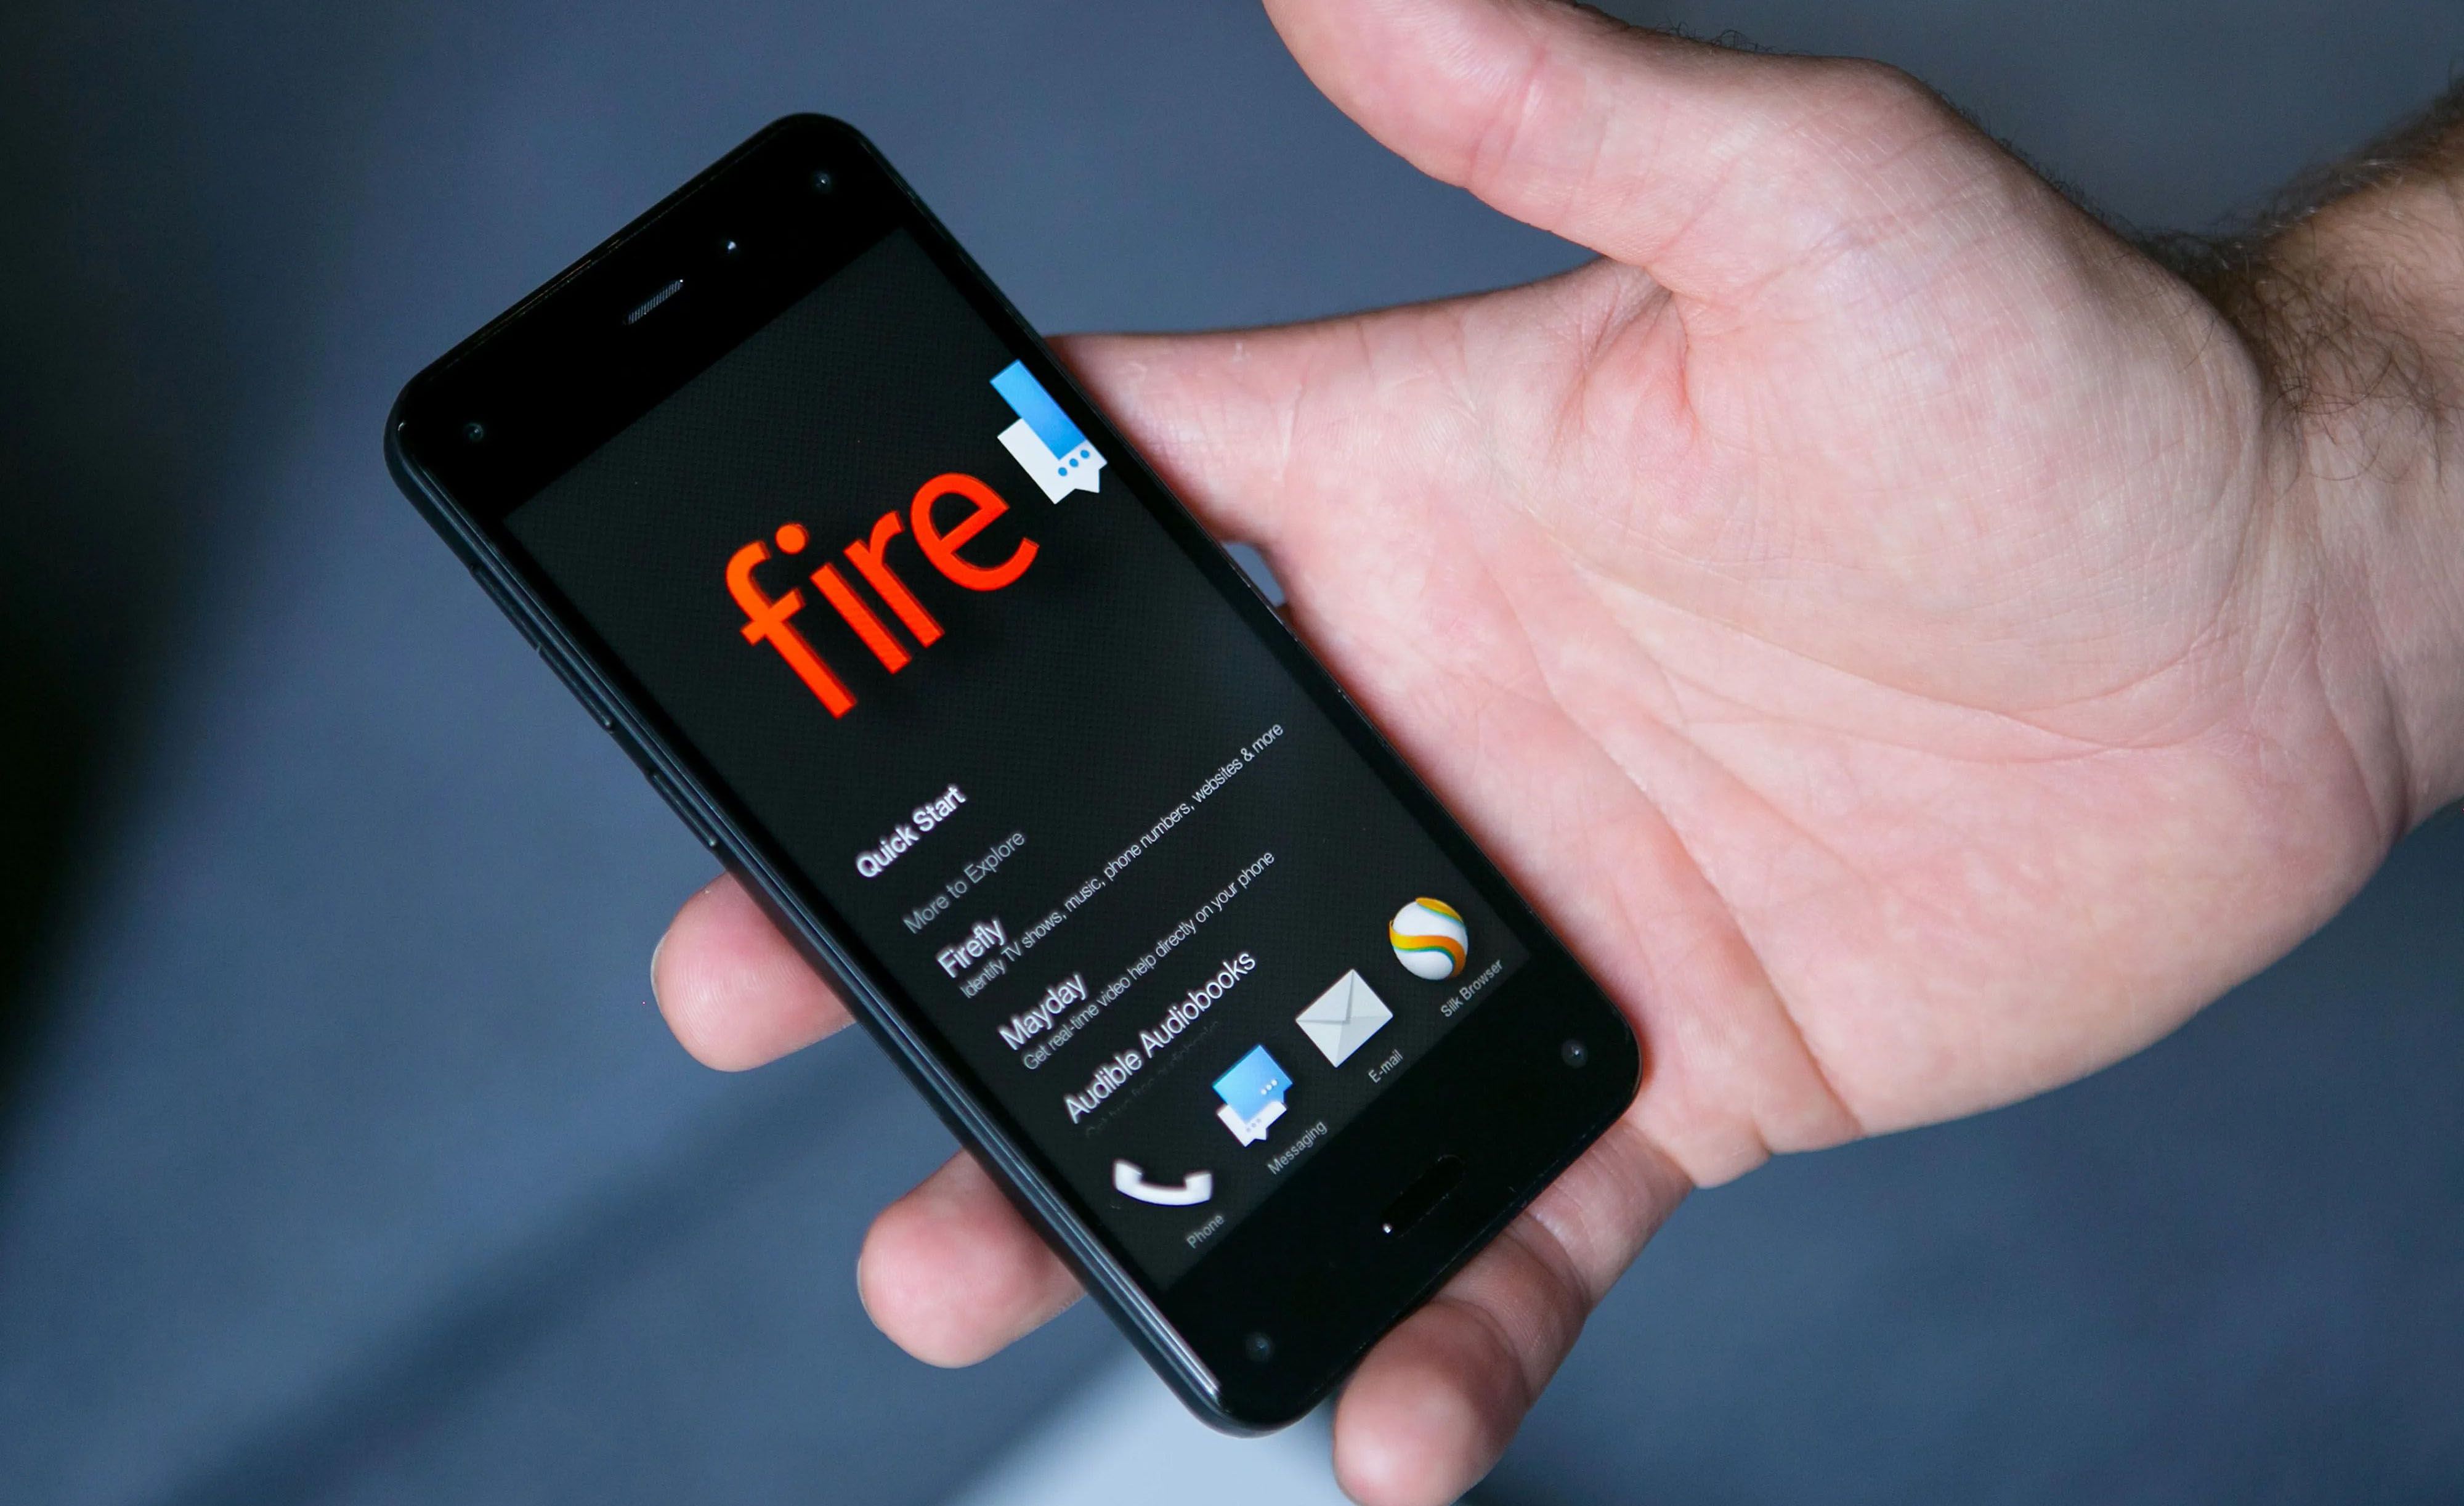 The Amazon Fire Phone laying in someone's hand.